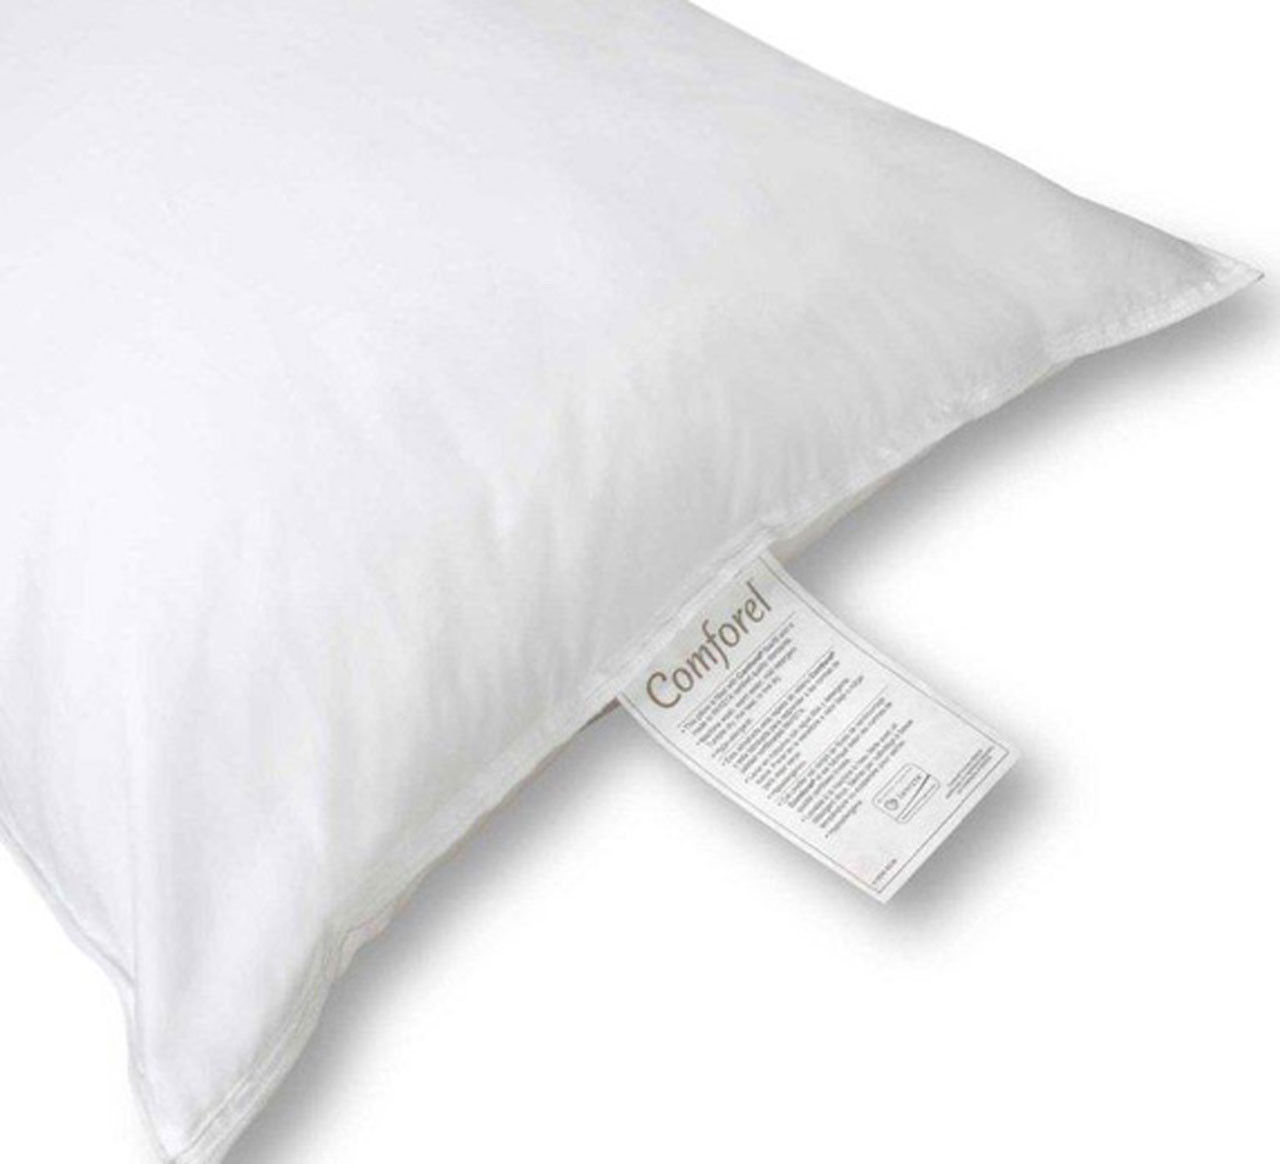 What does the Comforel Pillow's innovative technology guarantee for comforel pillows?